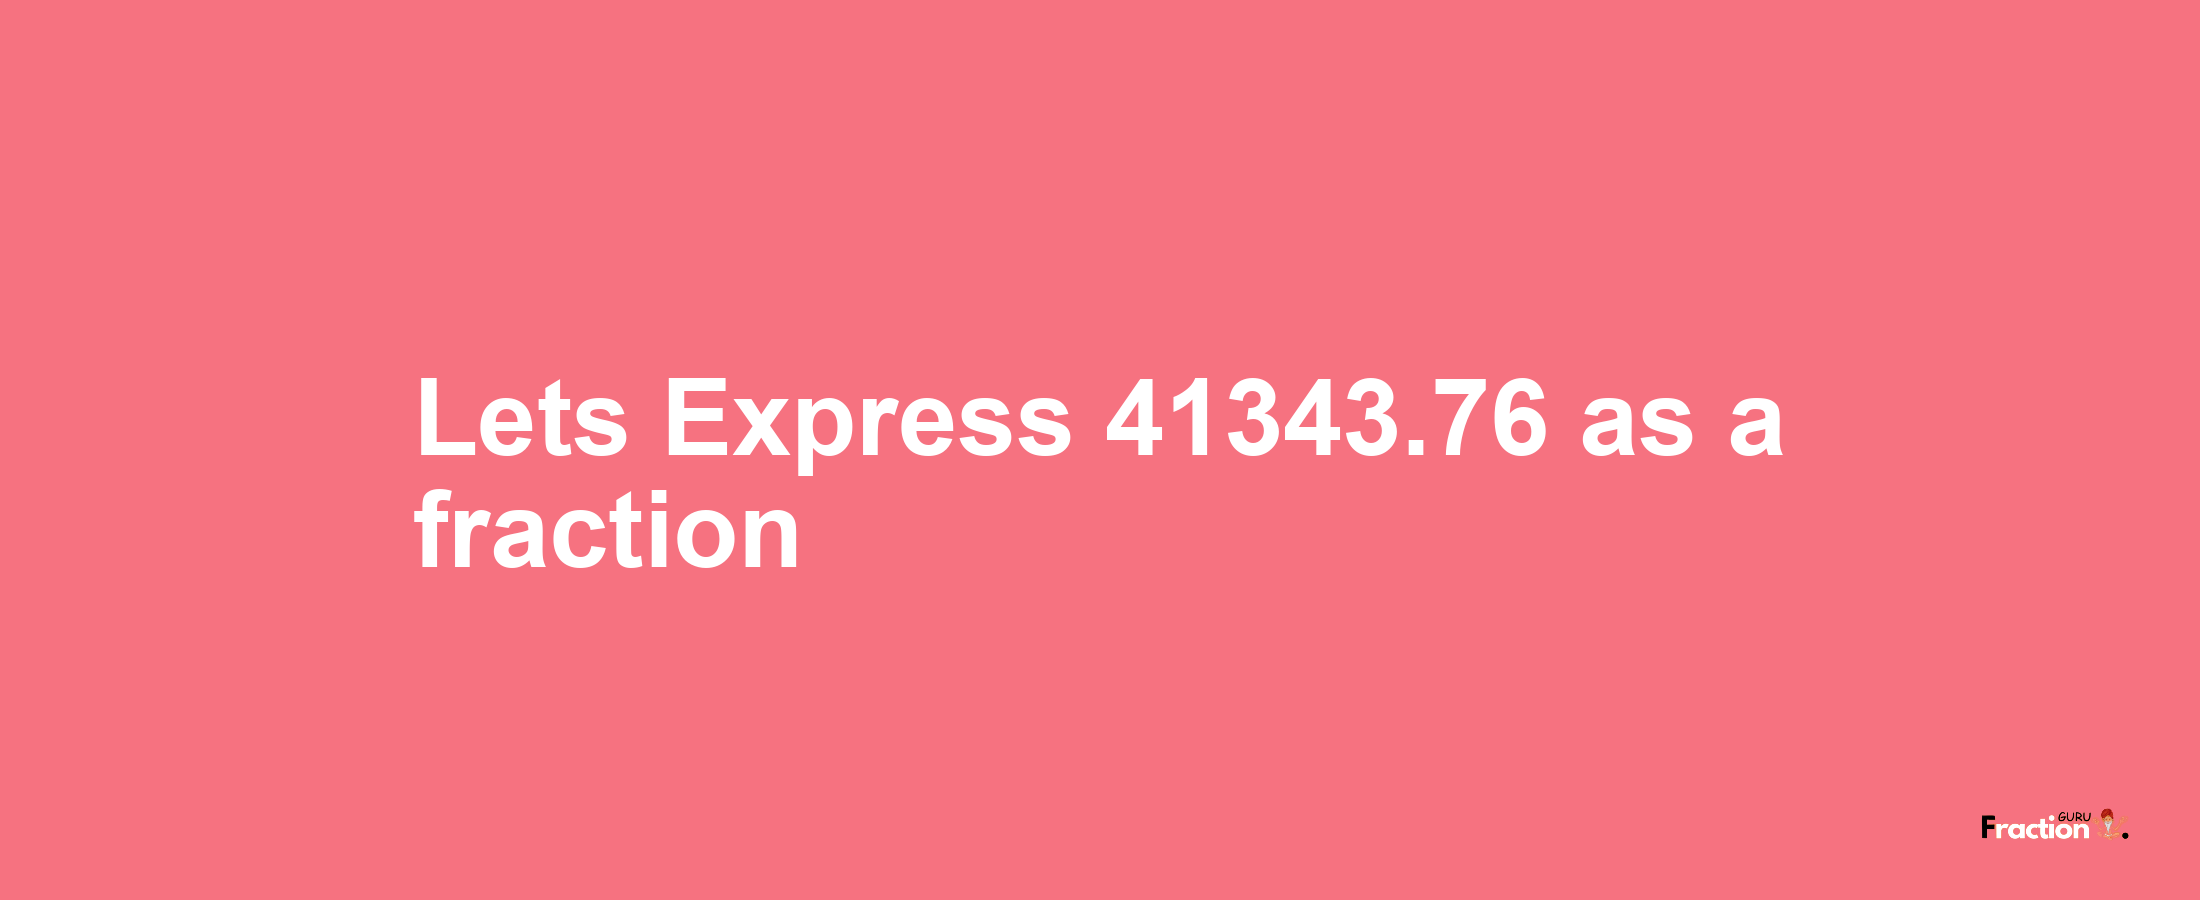 Lets Express 41343.76 as afraction